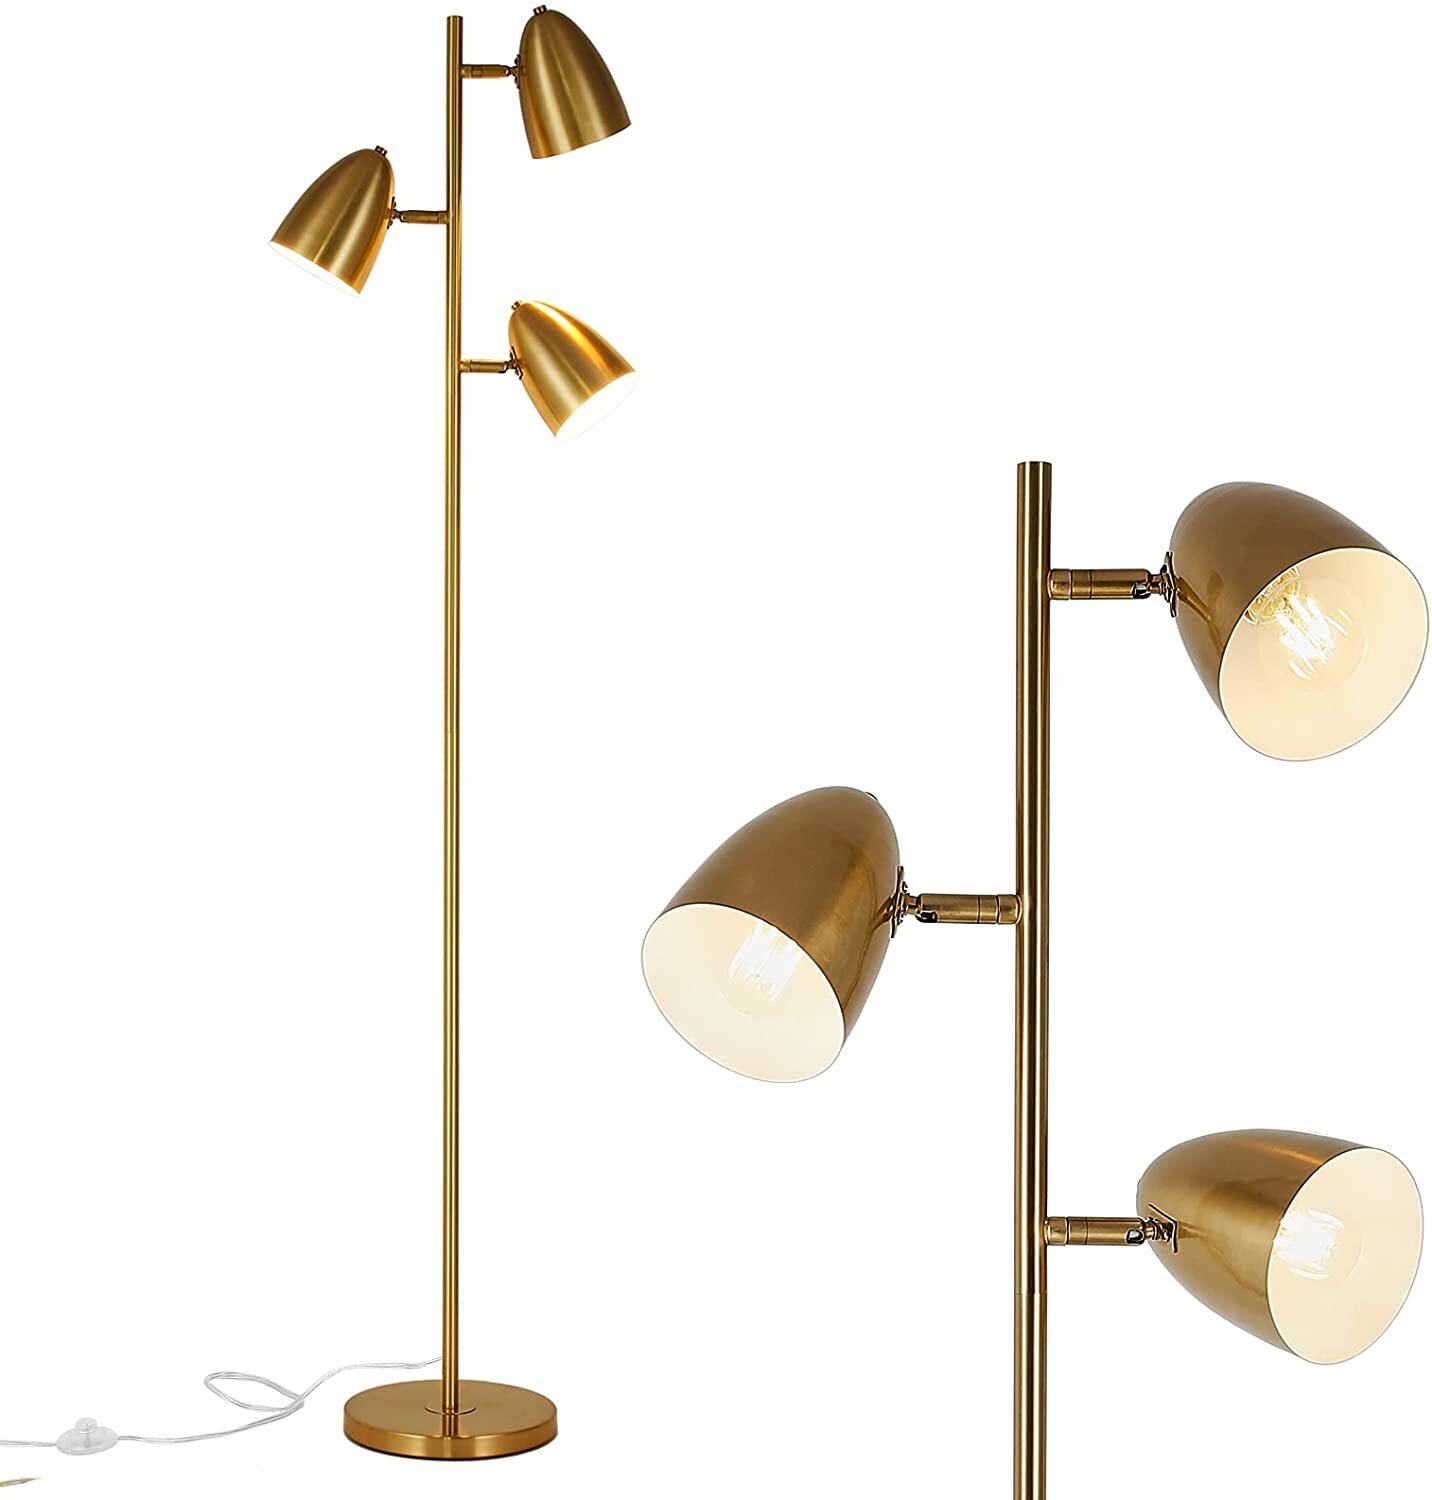 Corrigan Studio® Floor Lamp For Living Room,Light Tree Standing Reading  Light With Adjustable Metal Shades, Modern Tall Pole Lamp With Three LED  Bulbs For Bedroom, Office, Studying Room-Antique Brass | Wayfair